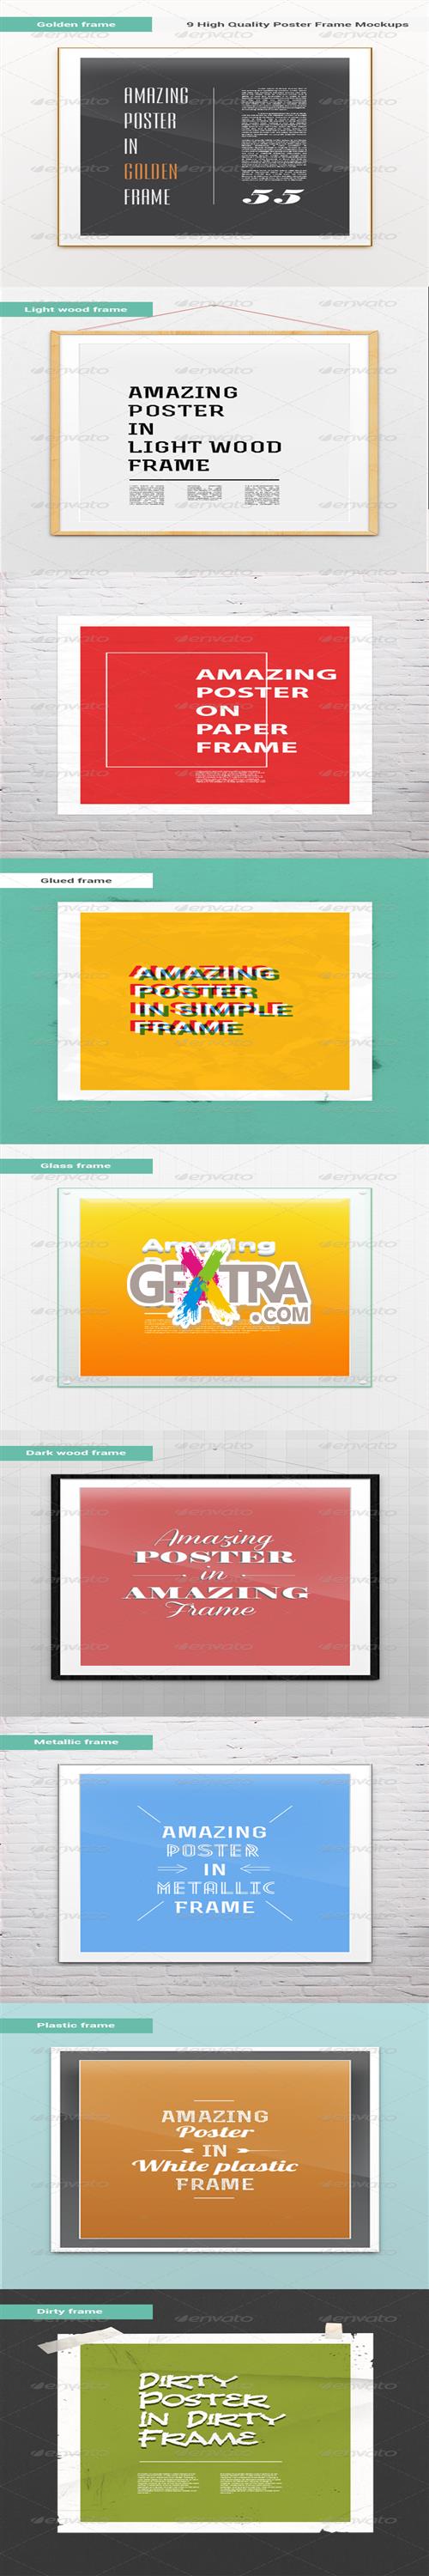 GraphicRiver - 9 High Quality Picture/Poster Frame Mock-Ups